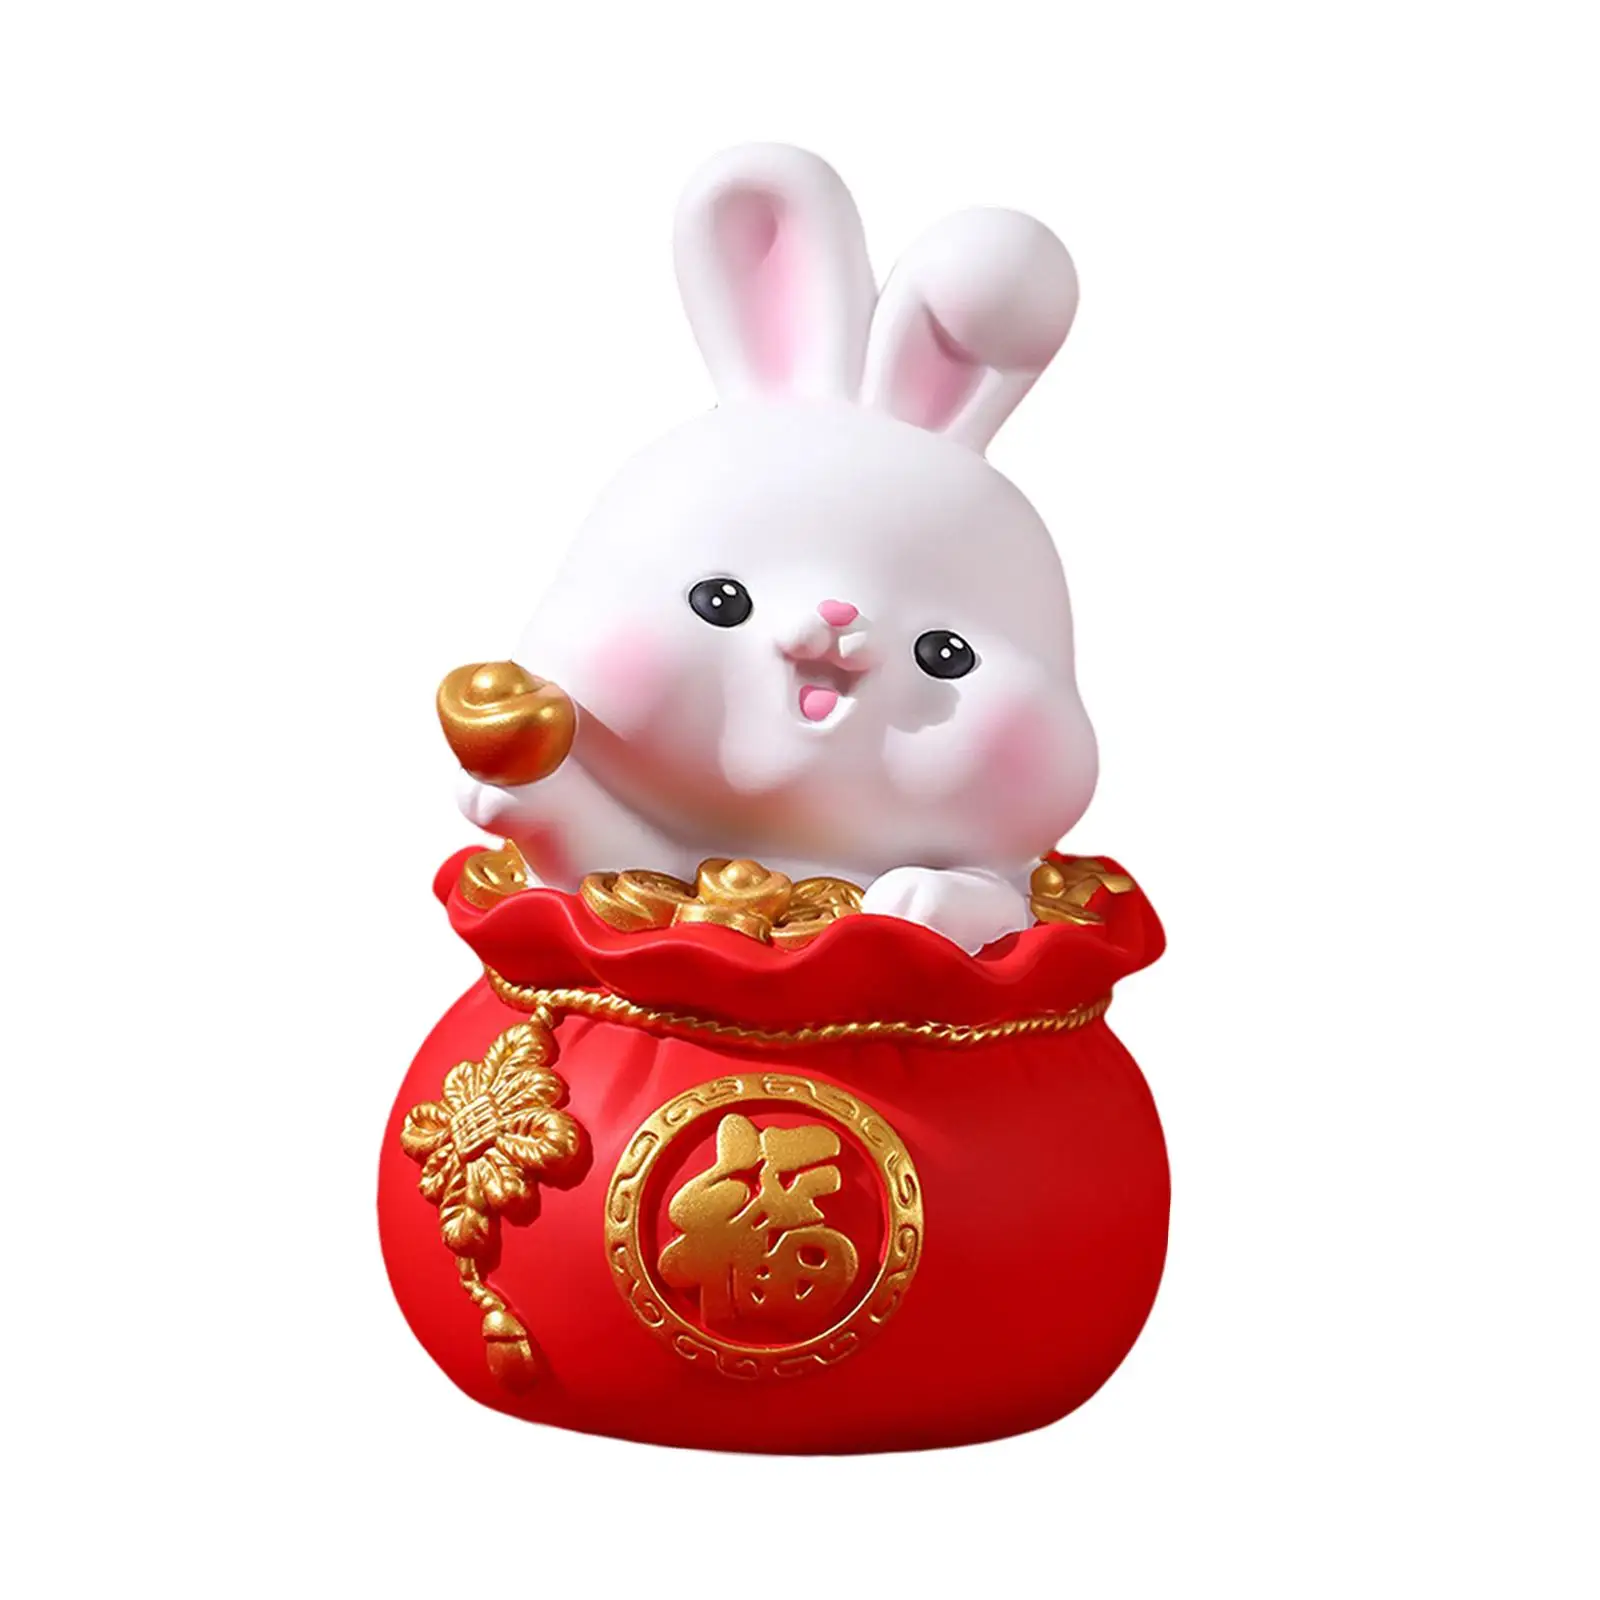 Chinese New Year Lucky Rabbit Statues Photo Prop Indoor Money Box Figurine for Office Wedding Decorative Housewarming Gif